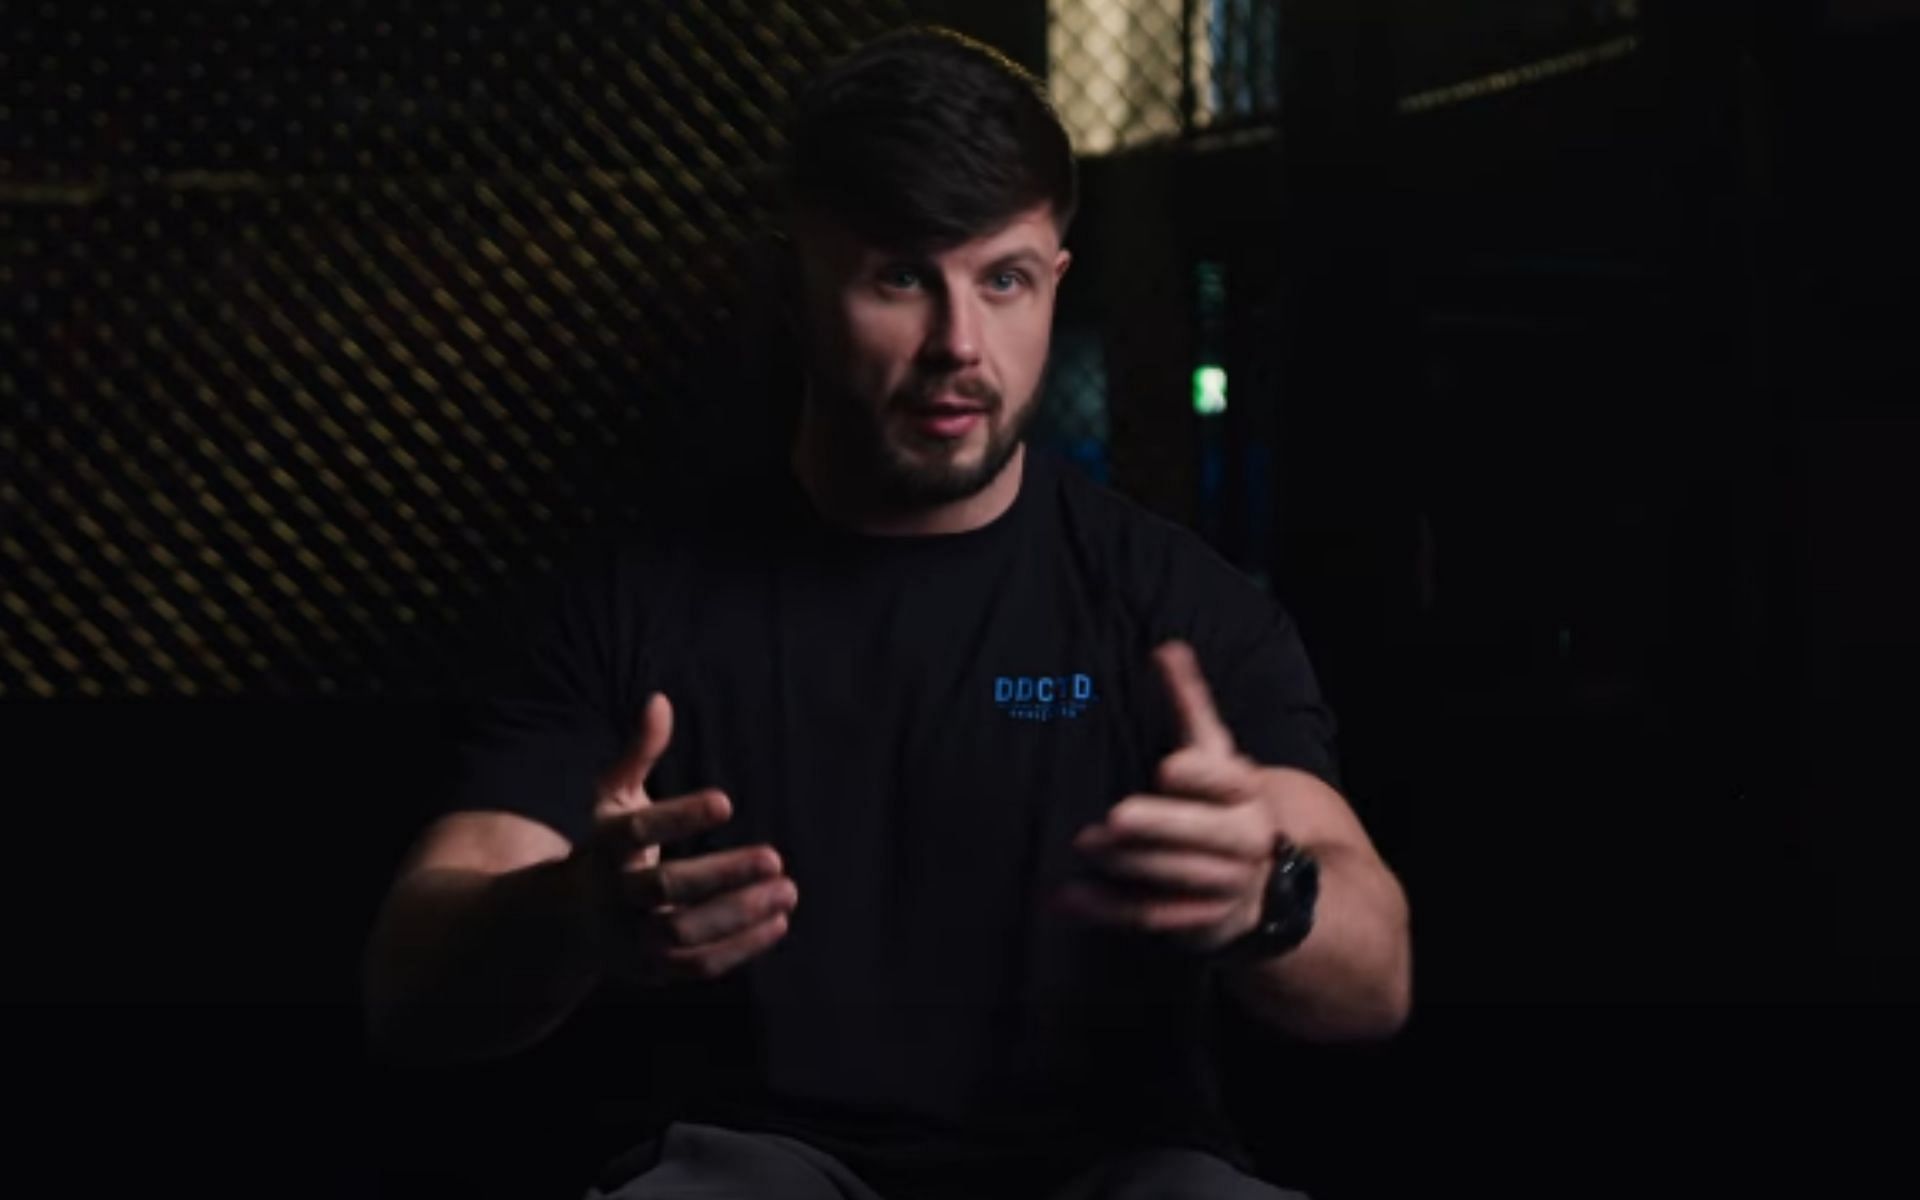 Karl Moore shares heartfelt message about his father ahead of vacant Bellator light heavyweight title fight [Image courtesy: BellatorMMA - YouTube]